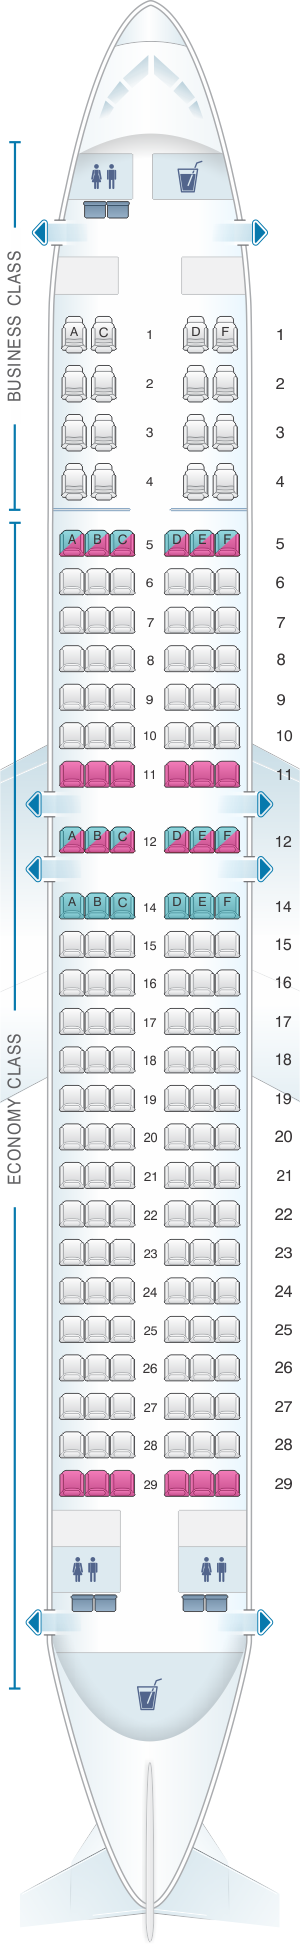 Seat Map Malaysia Airlines Boeing B737 800 160PAX | SeatMaestro.com